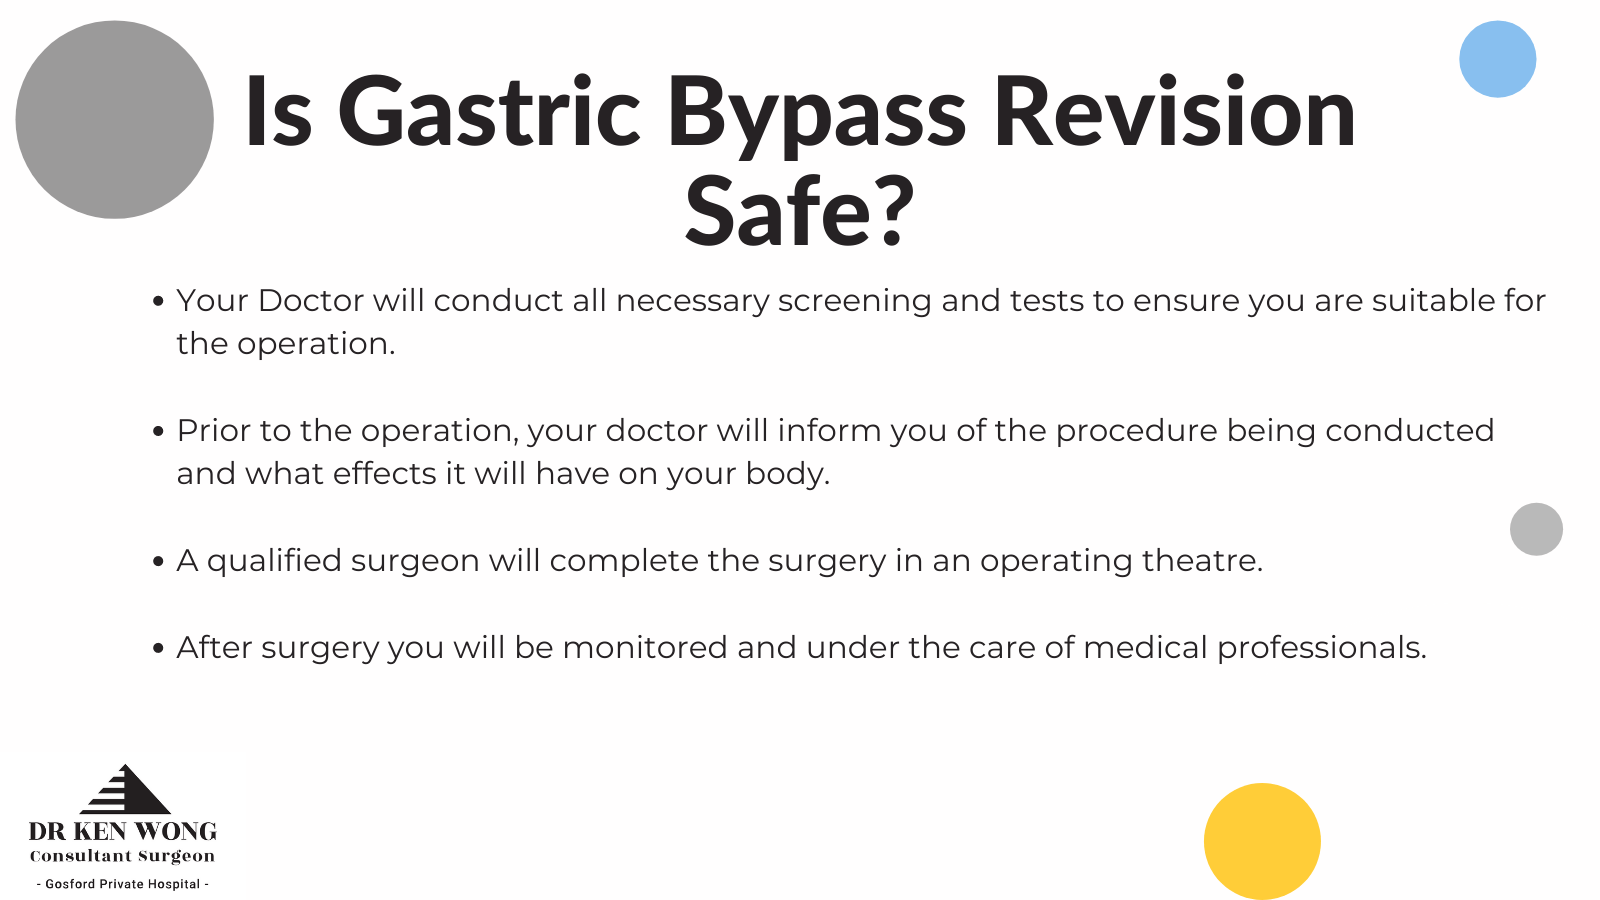 Gastric bypass revision safety